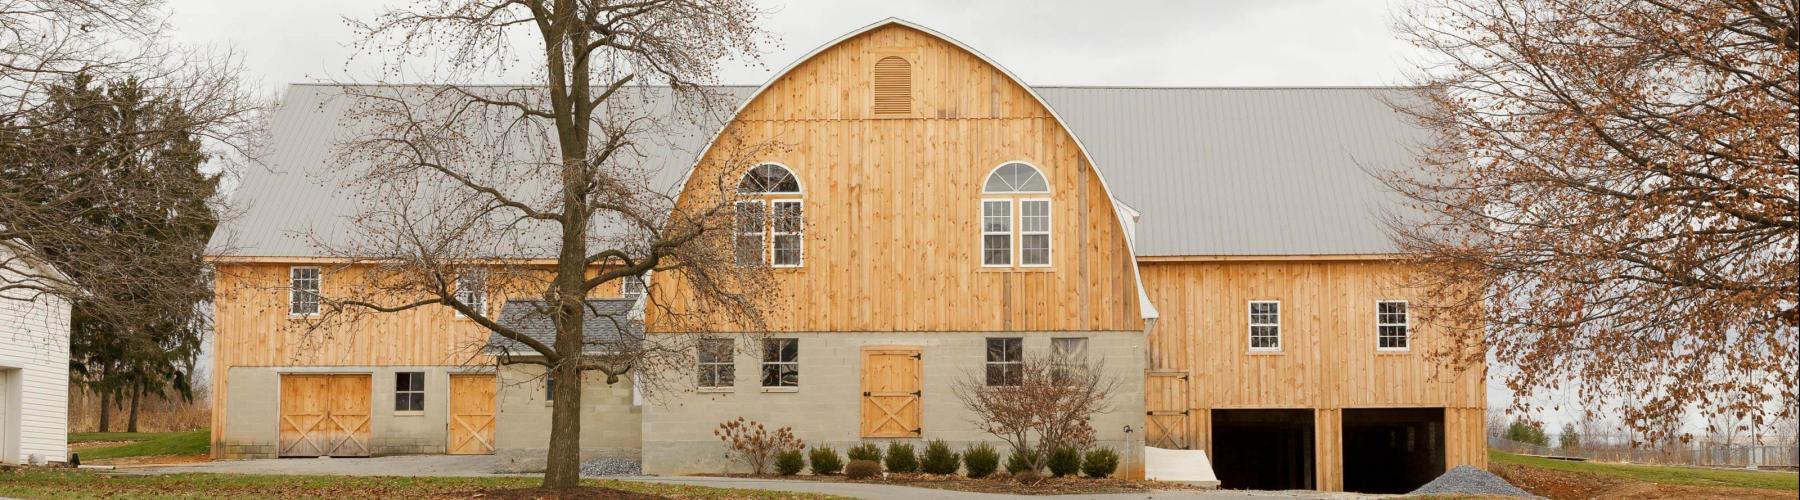 Bank barn restoration by Stable Hollow Construction